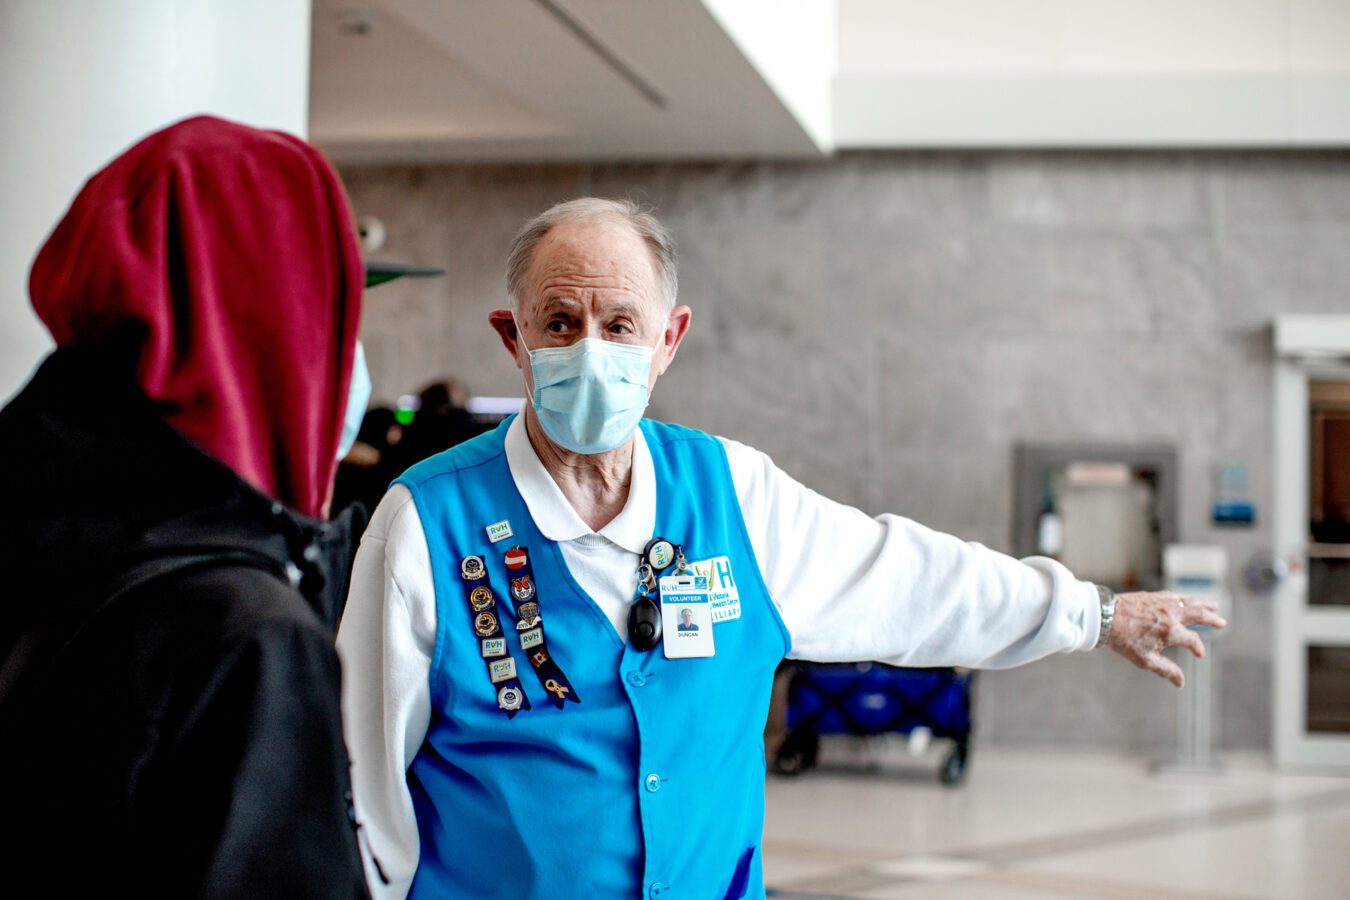 An RVH worker greets a patient and directs them with an outstretched hand. The worker wears a face mask and blue vest with RVH branding. He has short grey hair and light-toned skin.